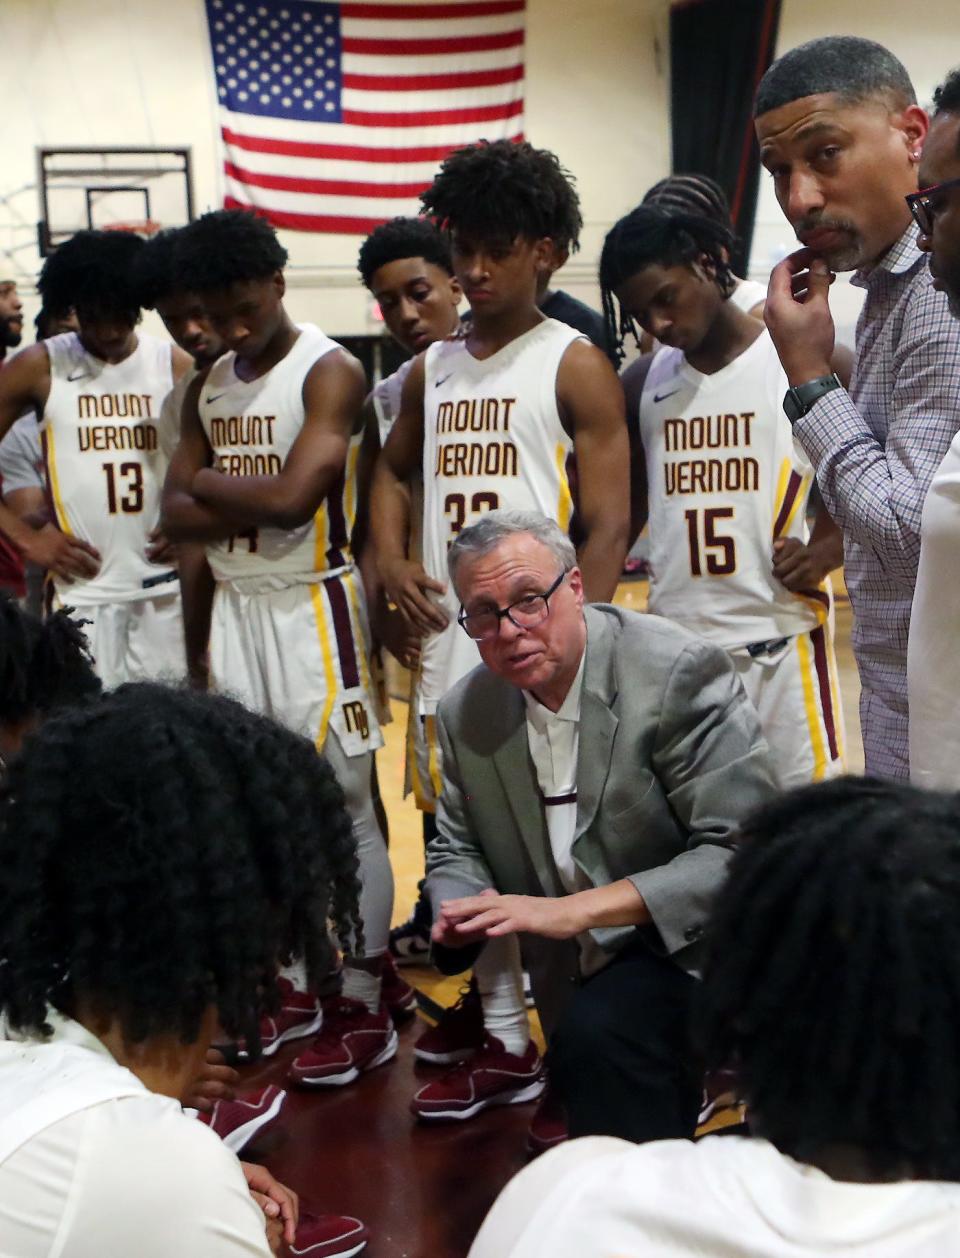 Mount Vernon coach Bob Cimmino believes his young team is halfway there in terms of understanding the system and finding roles. There are just five seniors on the roster.